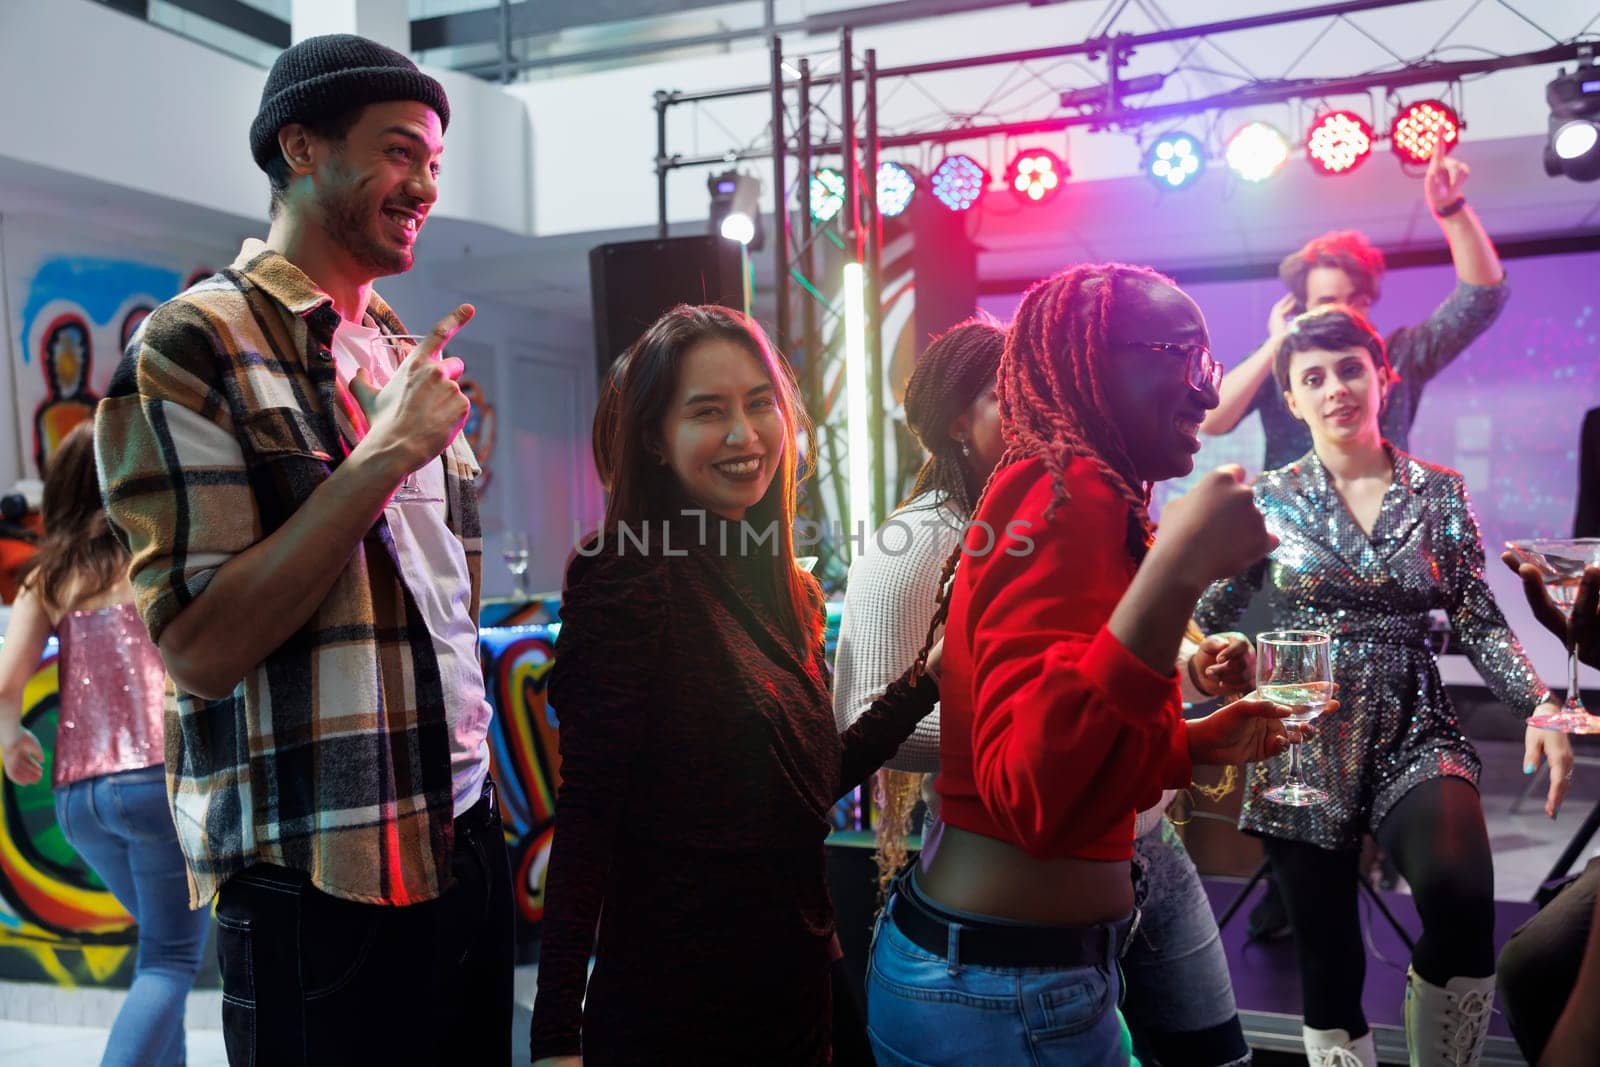 Smiling people drinking alcohol in club by DCStudio